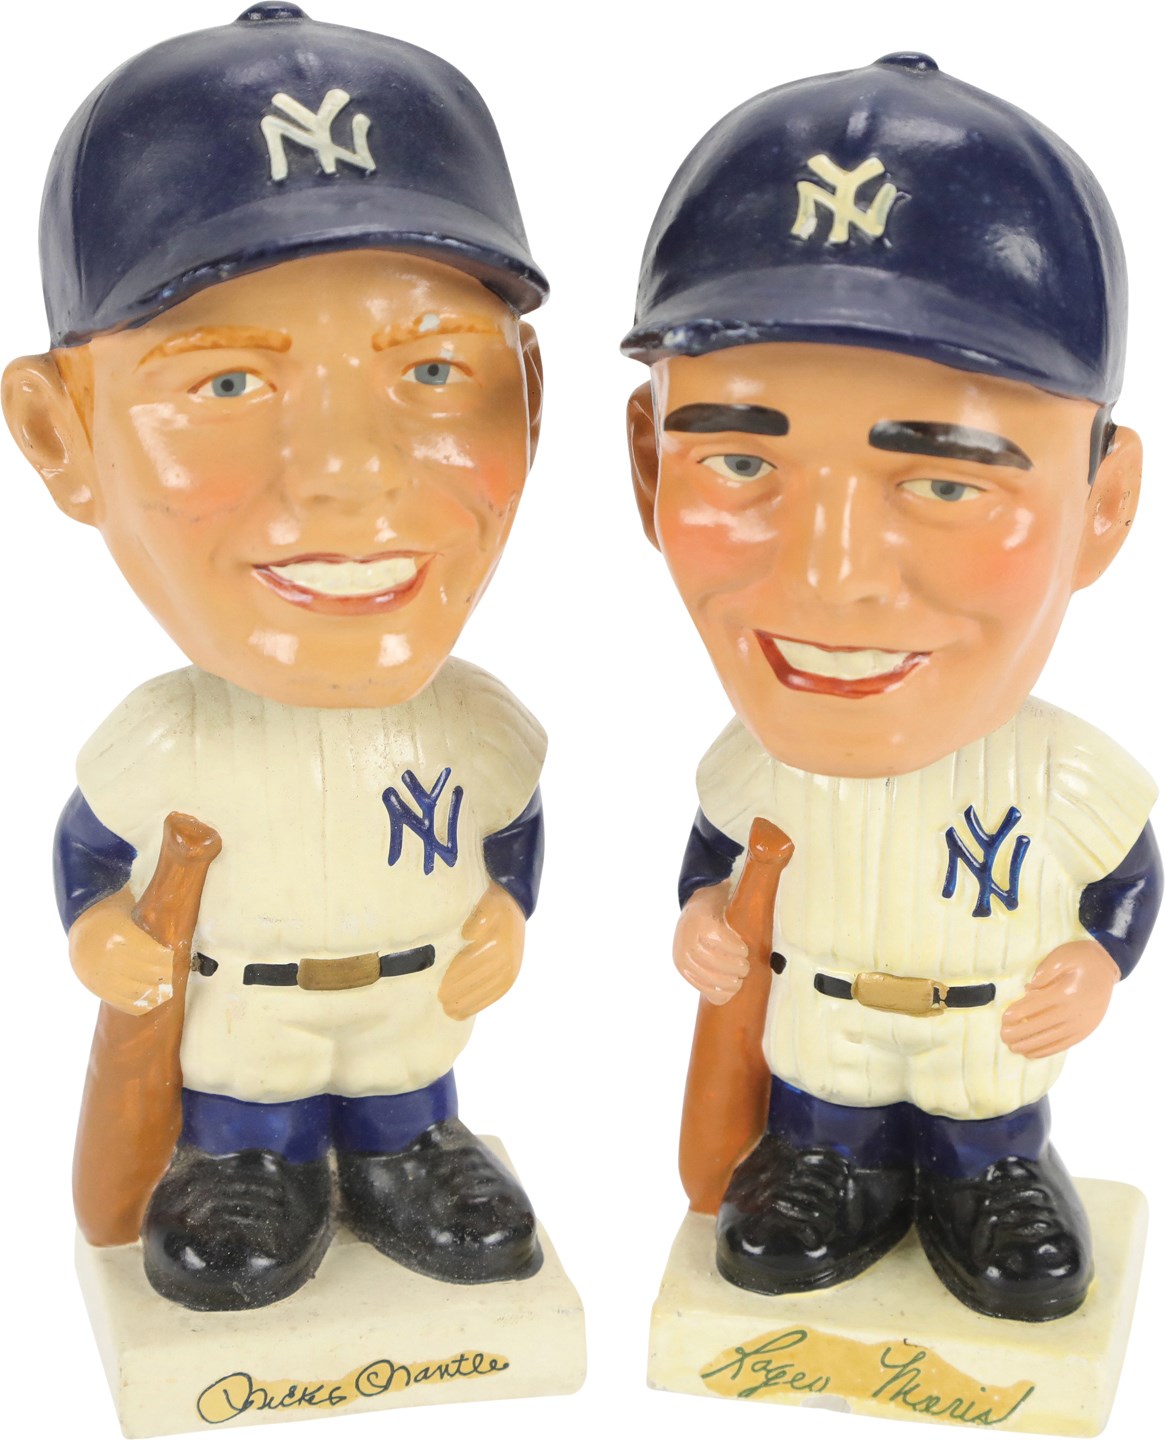 Mantle and Maris - 1961-63 Mickey Mantle and Roger Maris Bobble Heads